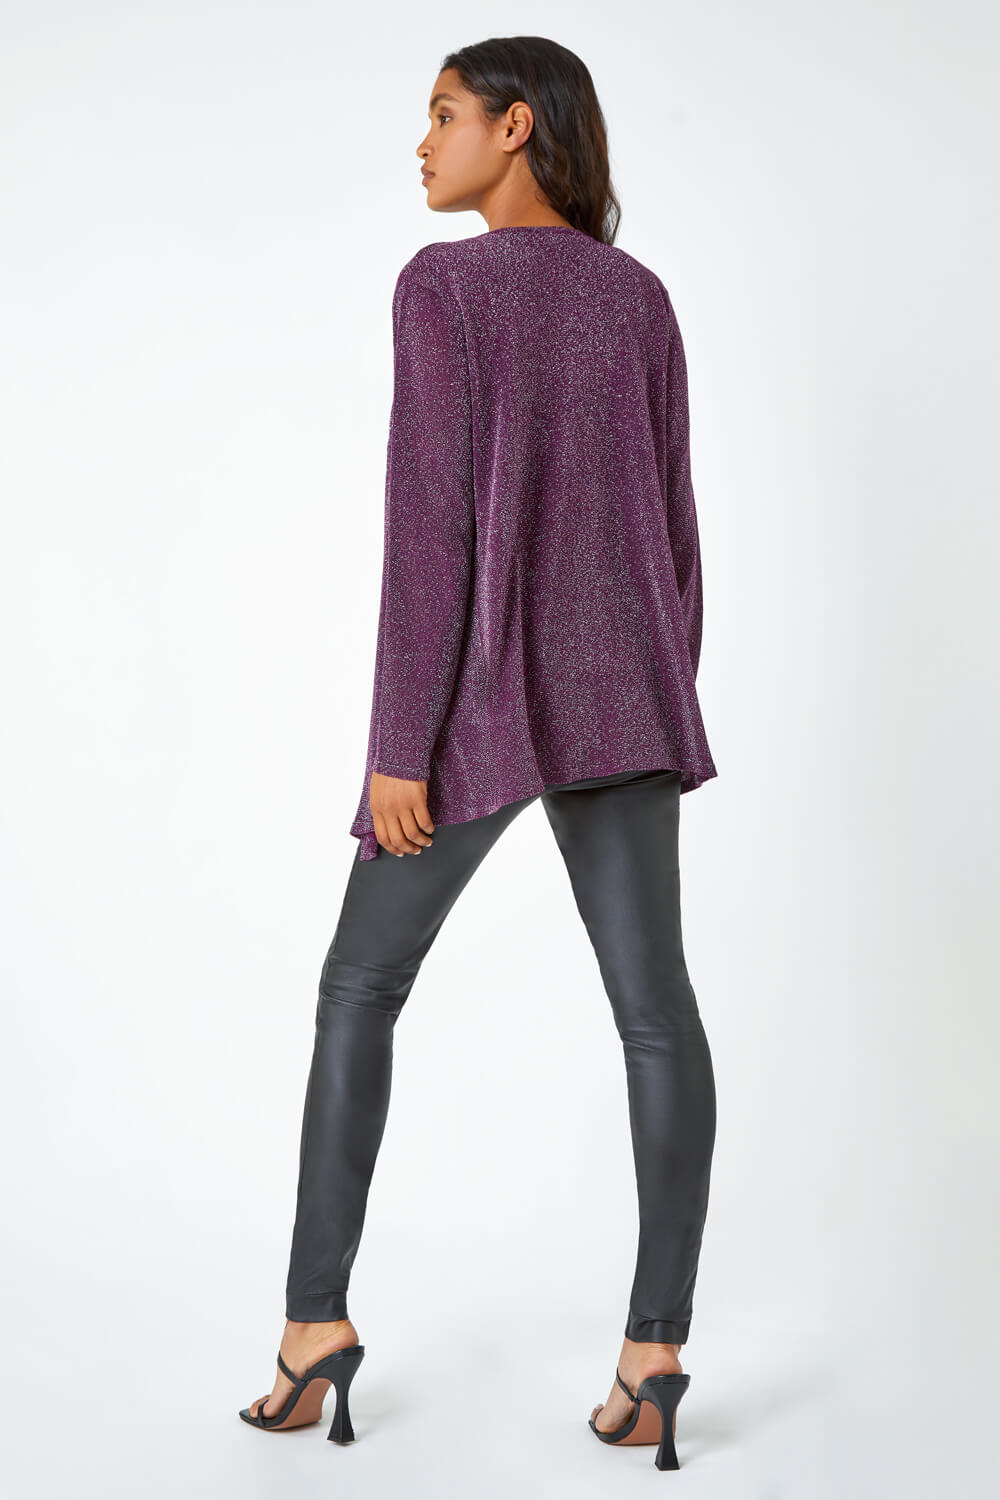 Aubergine Shimmer Waterfall Stretch Cardigan, Image 3 of 5